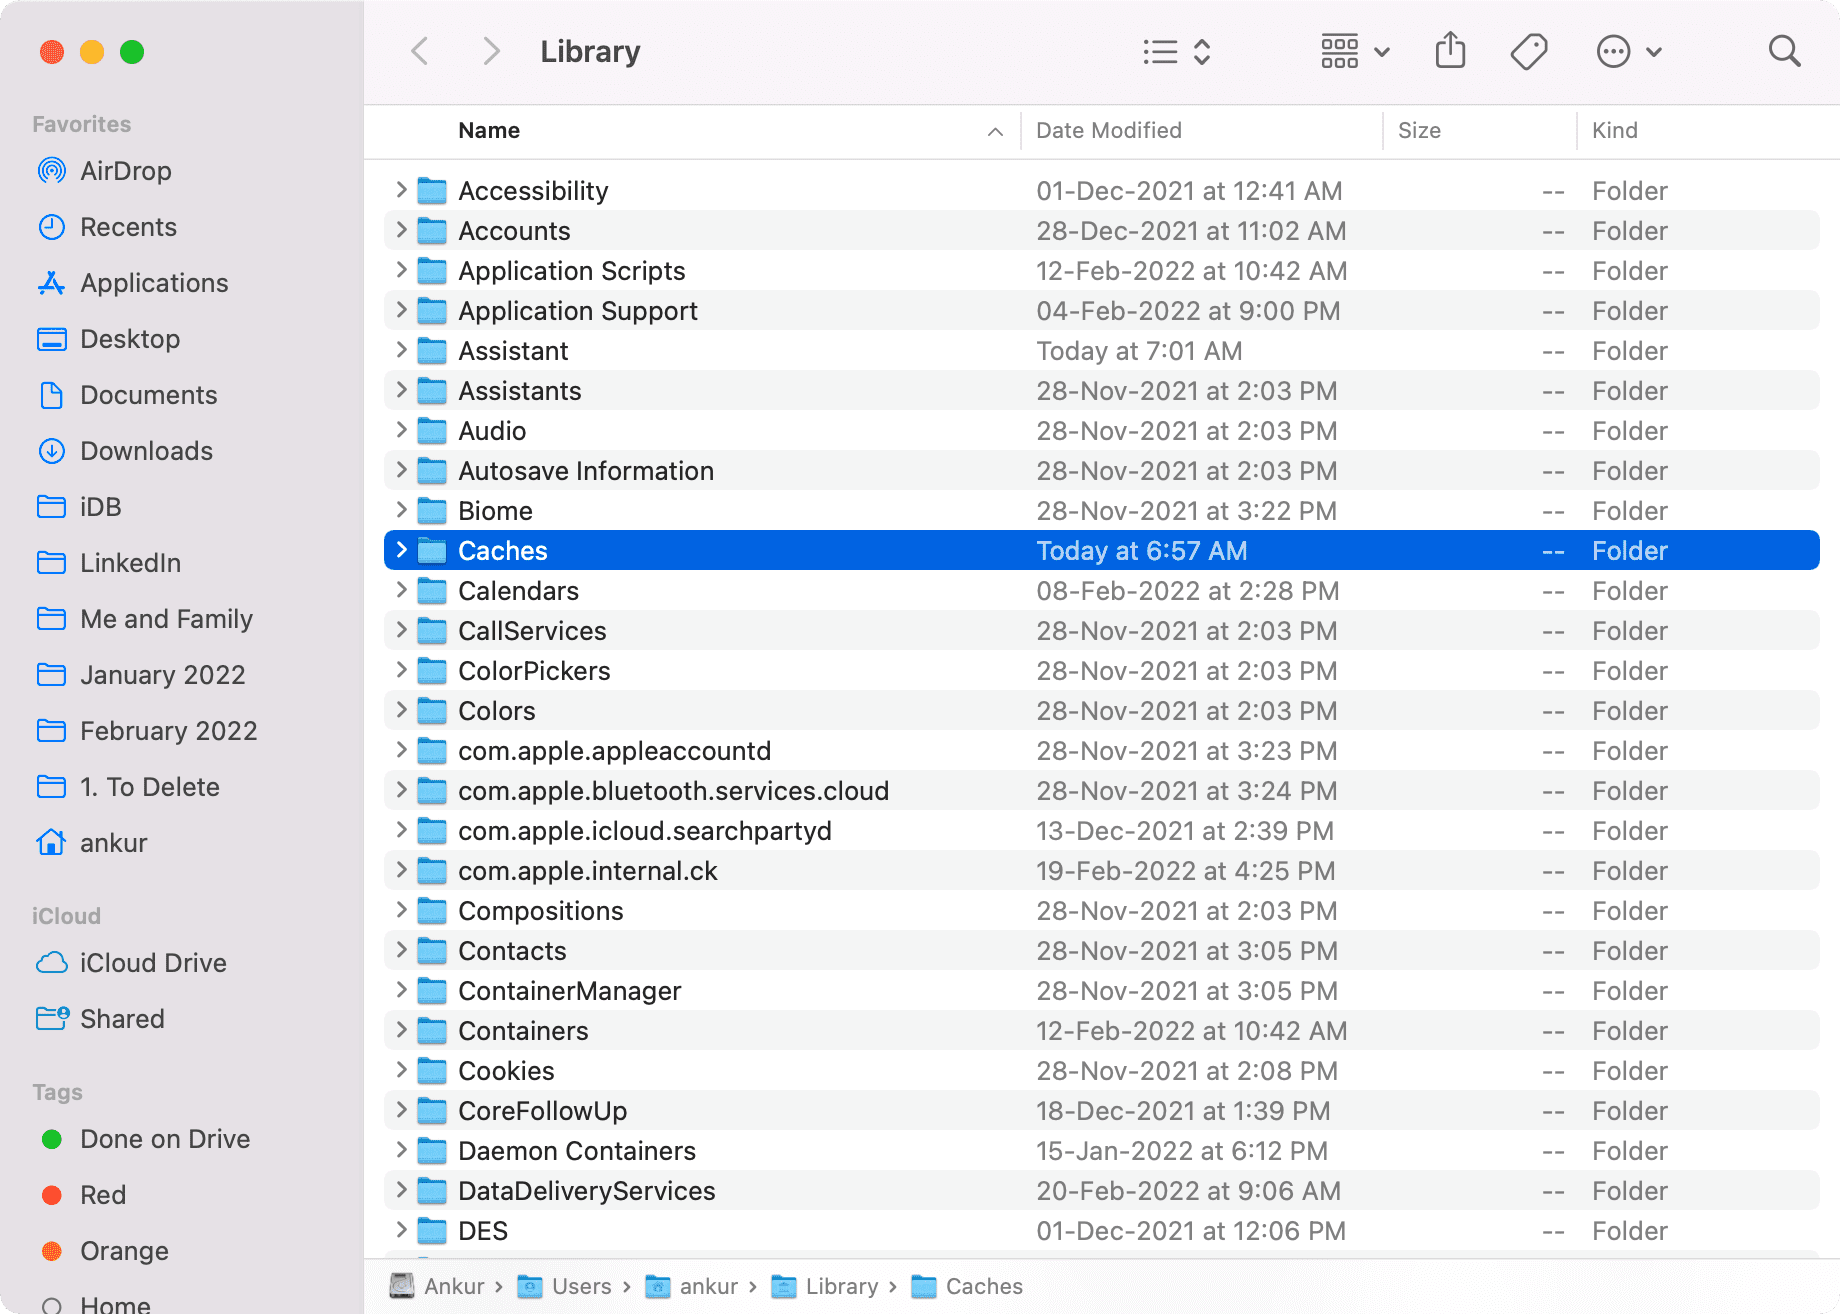 Delete the Caches folder on your Mac to free lots of space quickly